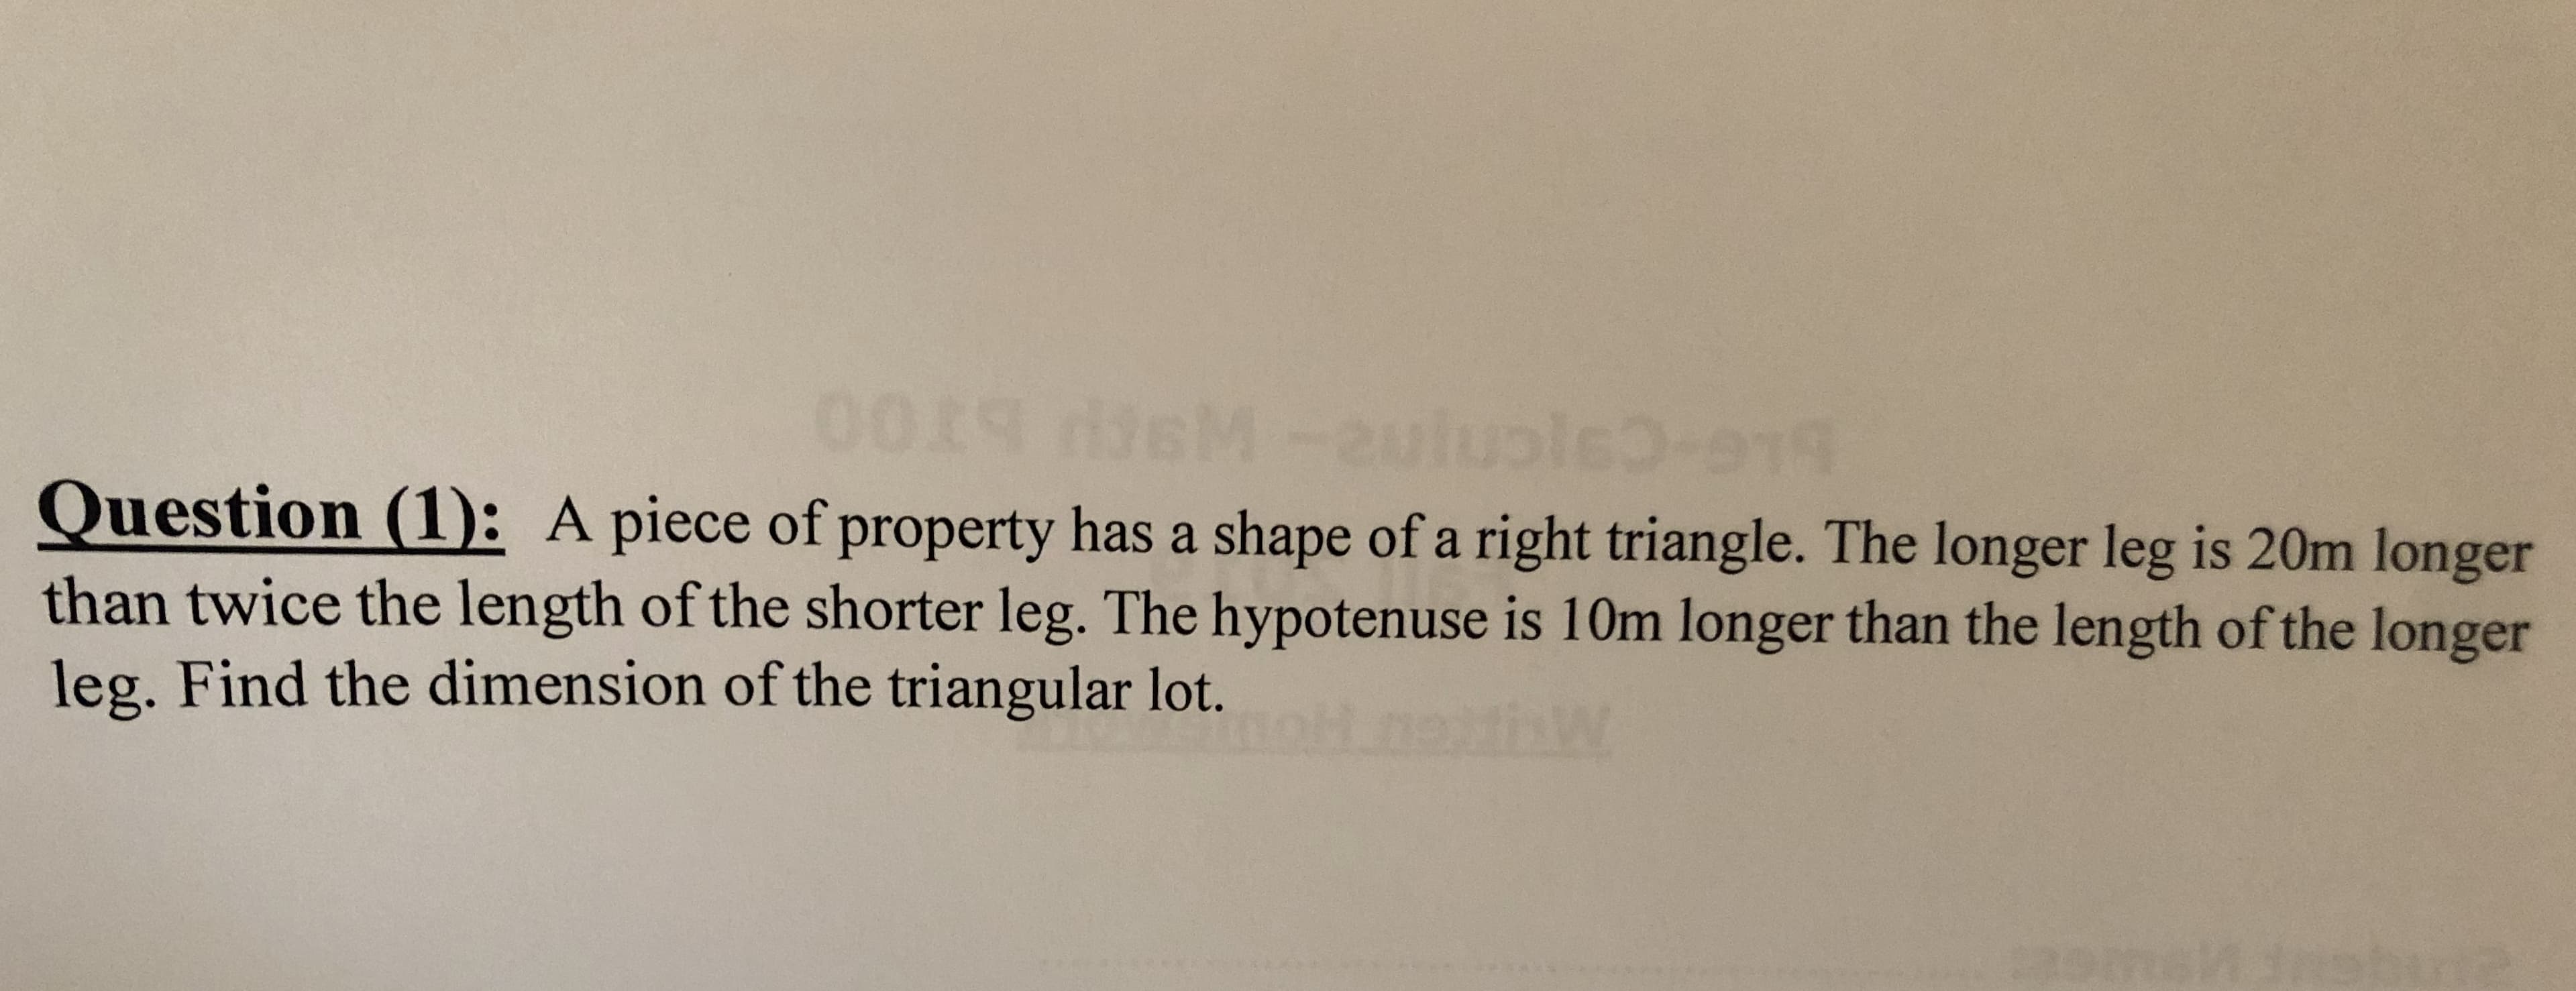 0019 fsM -2uluple.e
Question (1): A piece of property has a shape of a right triangle. The longer leg is 20m longer
than twice the length of the shorter leg. The hypotenuse is 10m longer than the length of the longer
leg. Find the dimension of the triangular lot.
W
